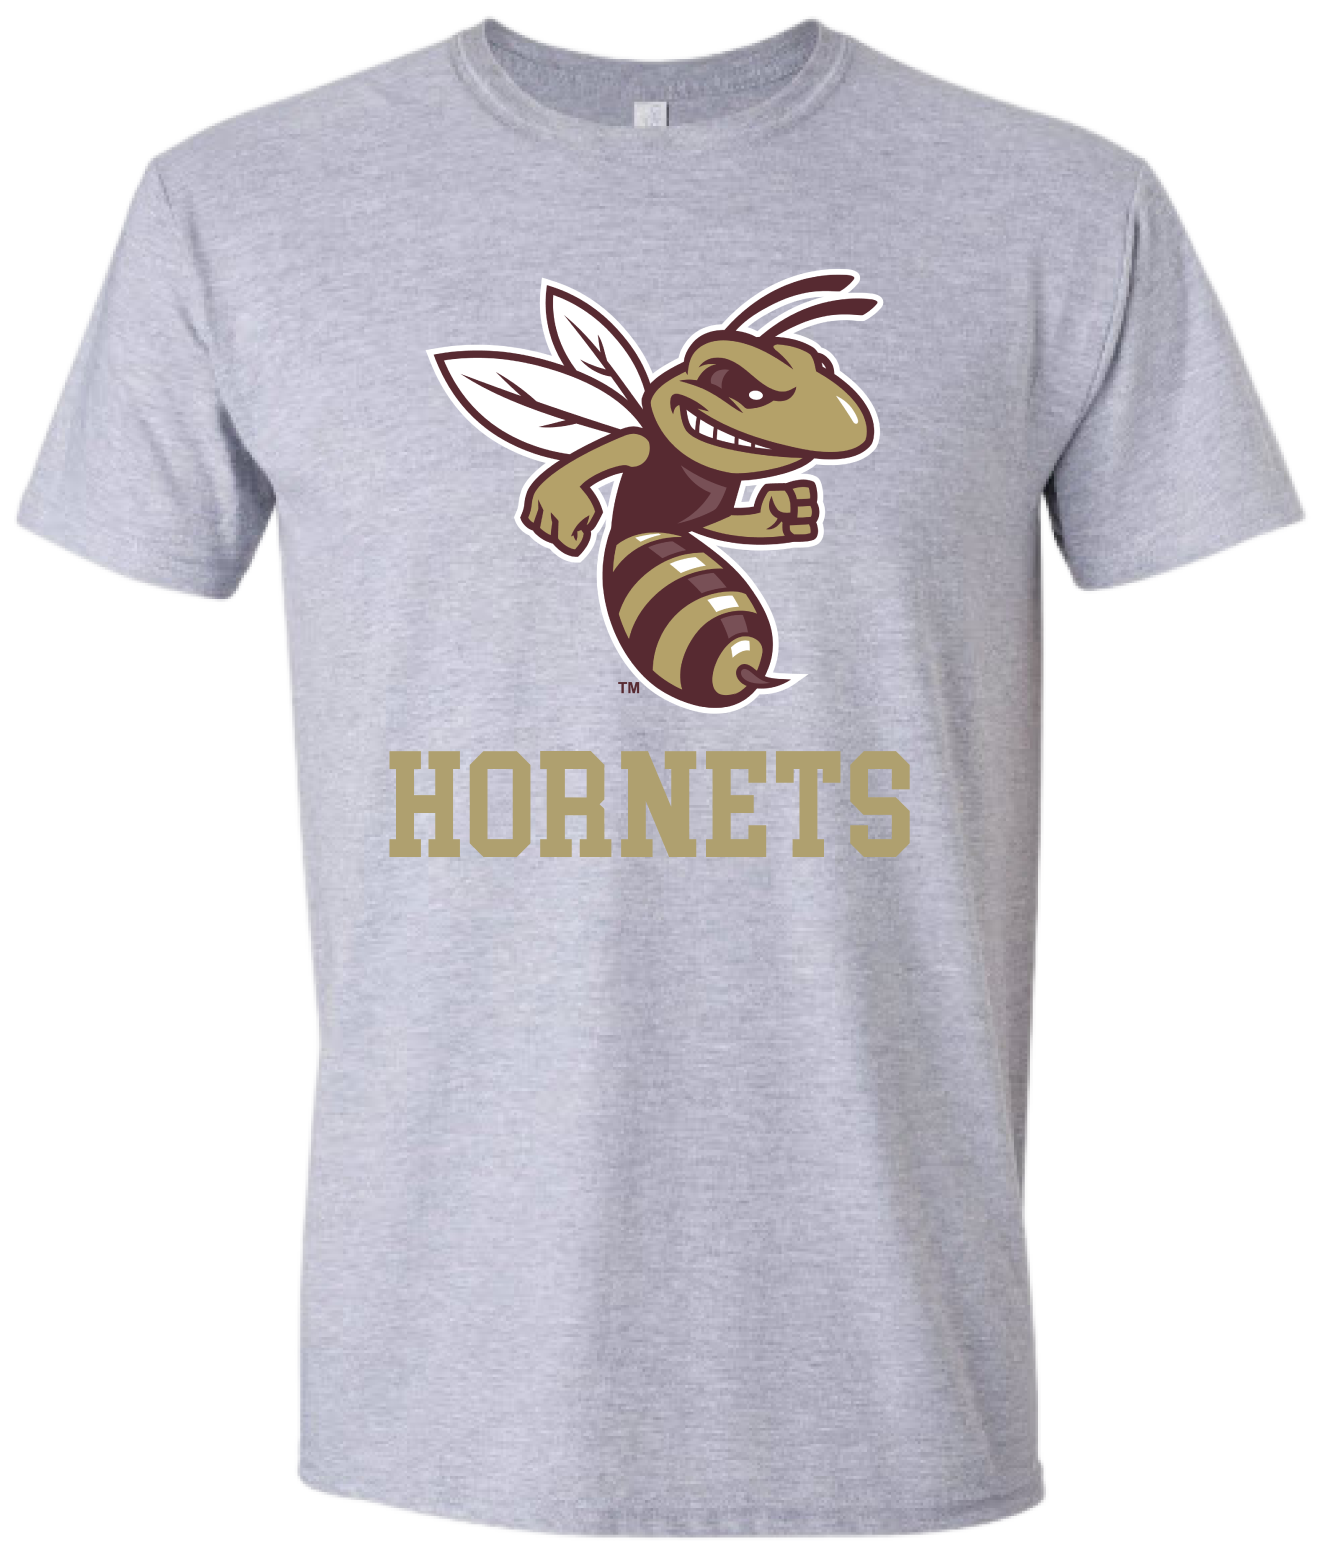 Youth Hornets Tee